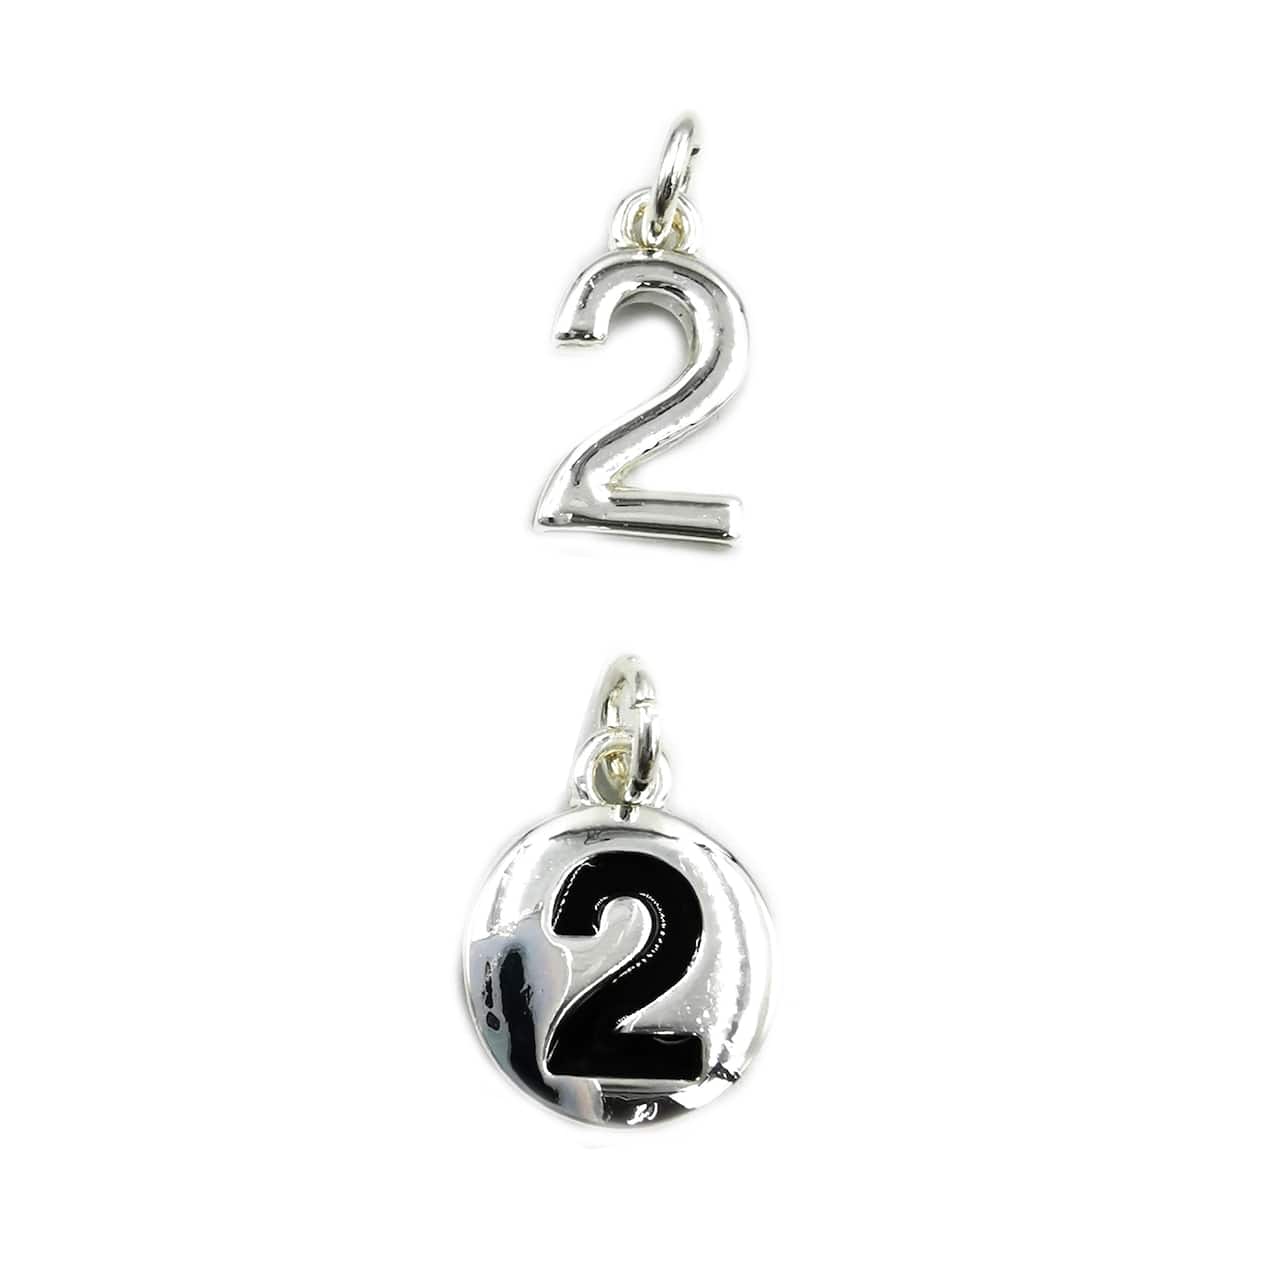 Charmalong™ Silver Plated Number Charms by Bead Landing™